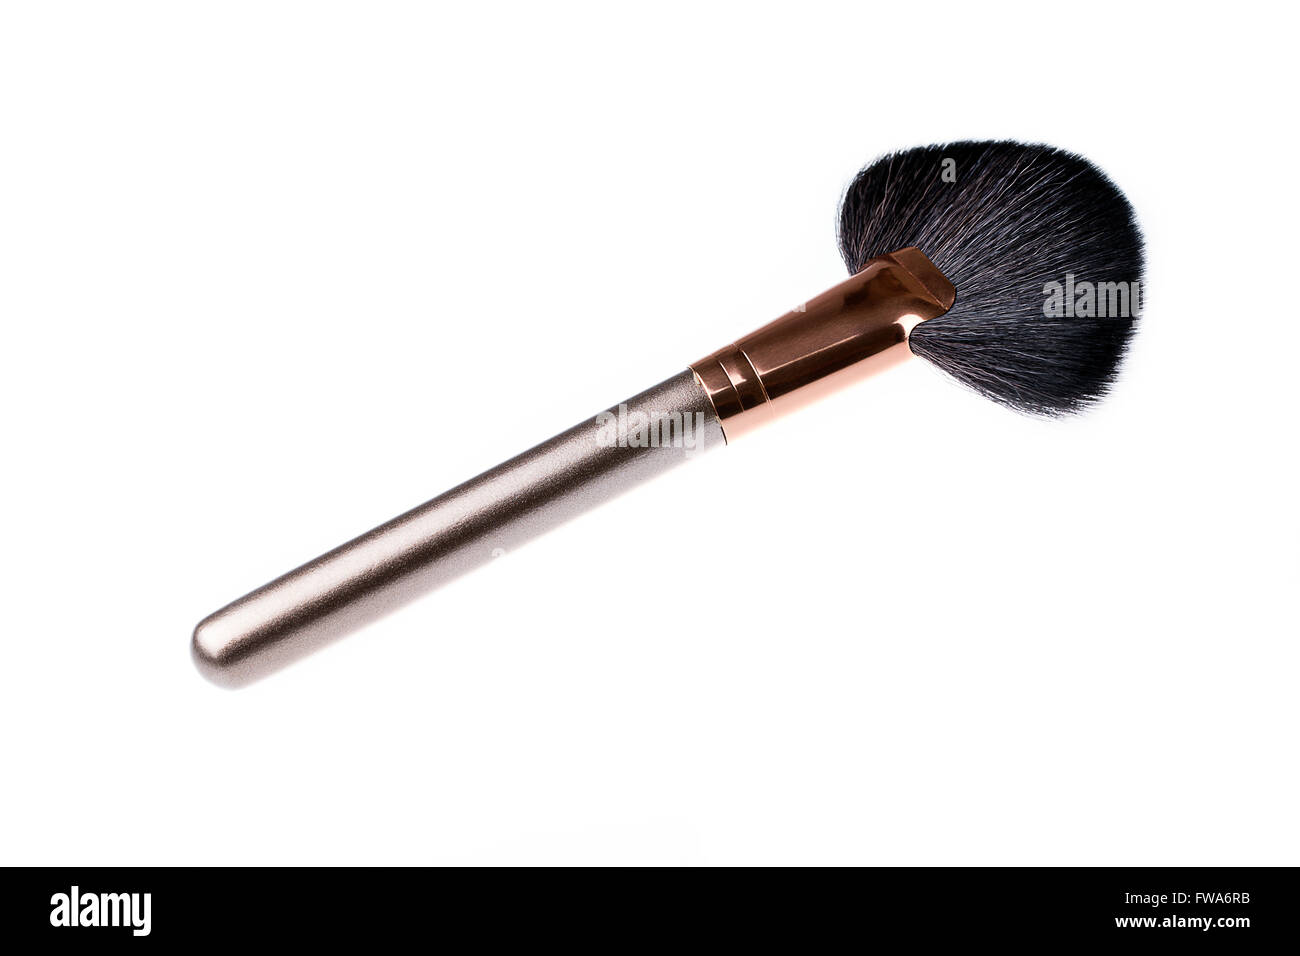 fan brush for make-up, to complete make up, dismiss cosmetics scaterred on the cheeks Stock Photo